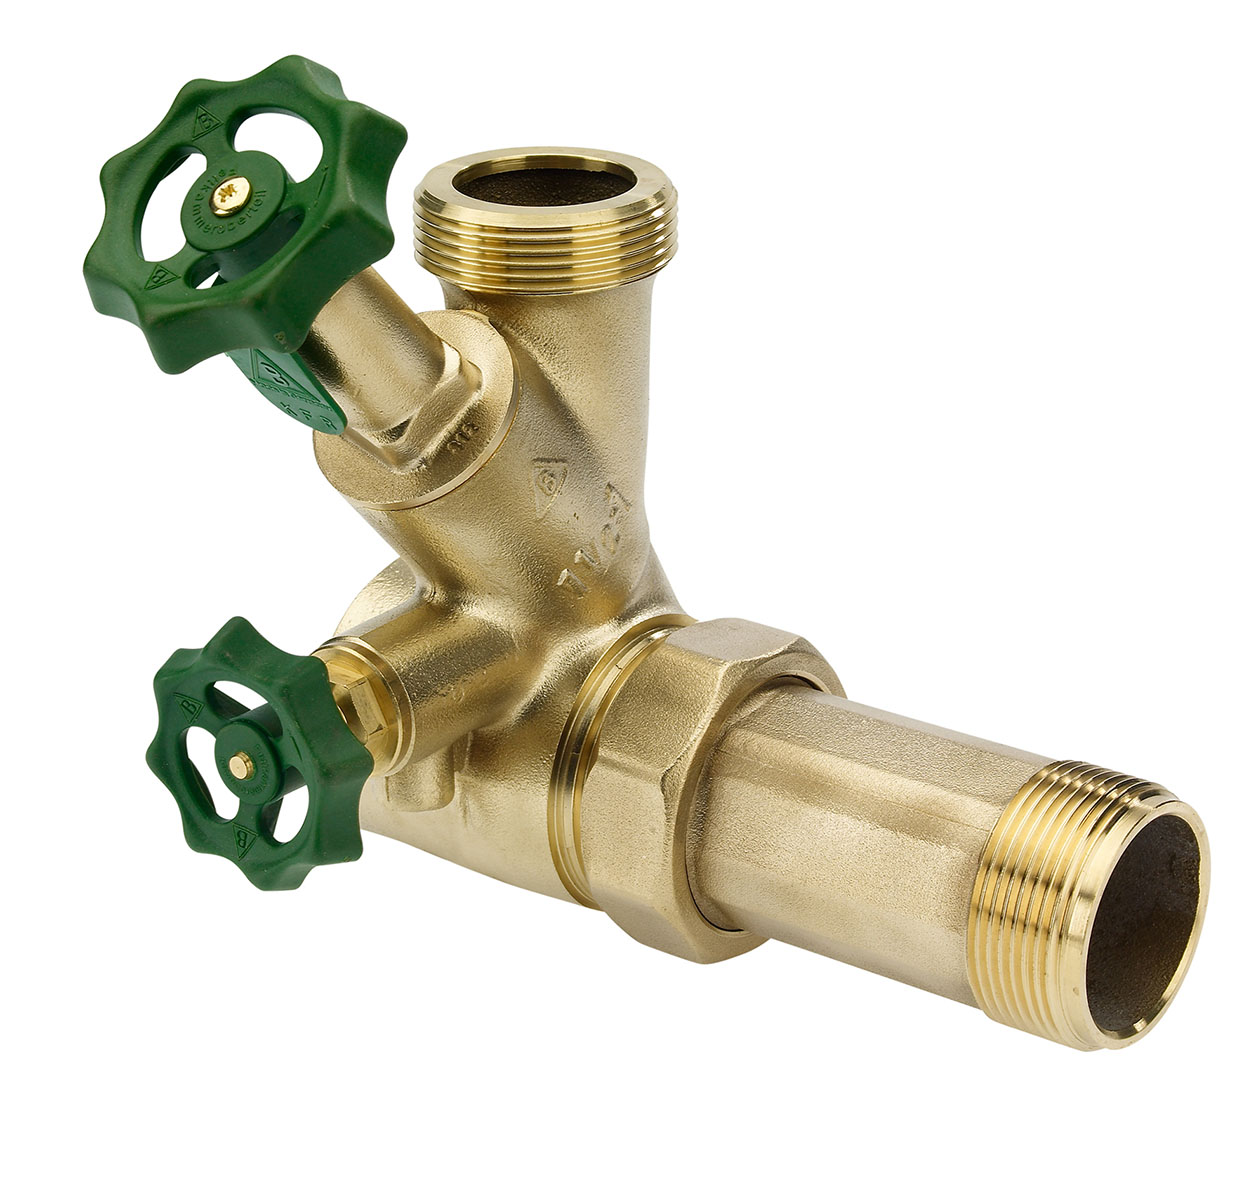 4021000 - CR-Brass Branch T-Valve Combined Free-flow and Backflow-preventer Body DN 40